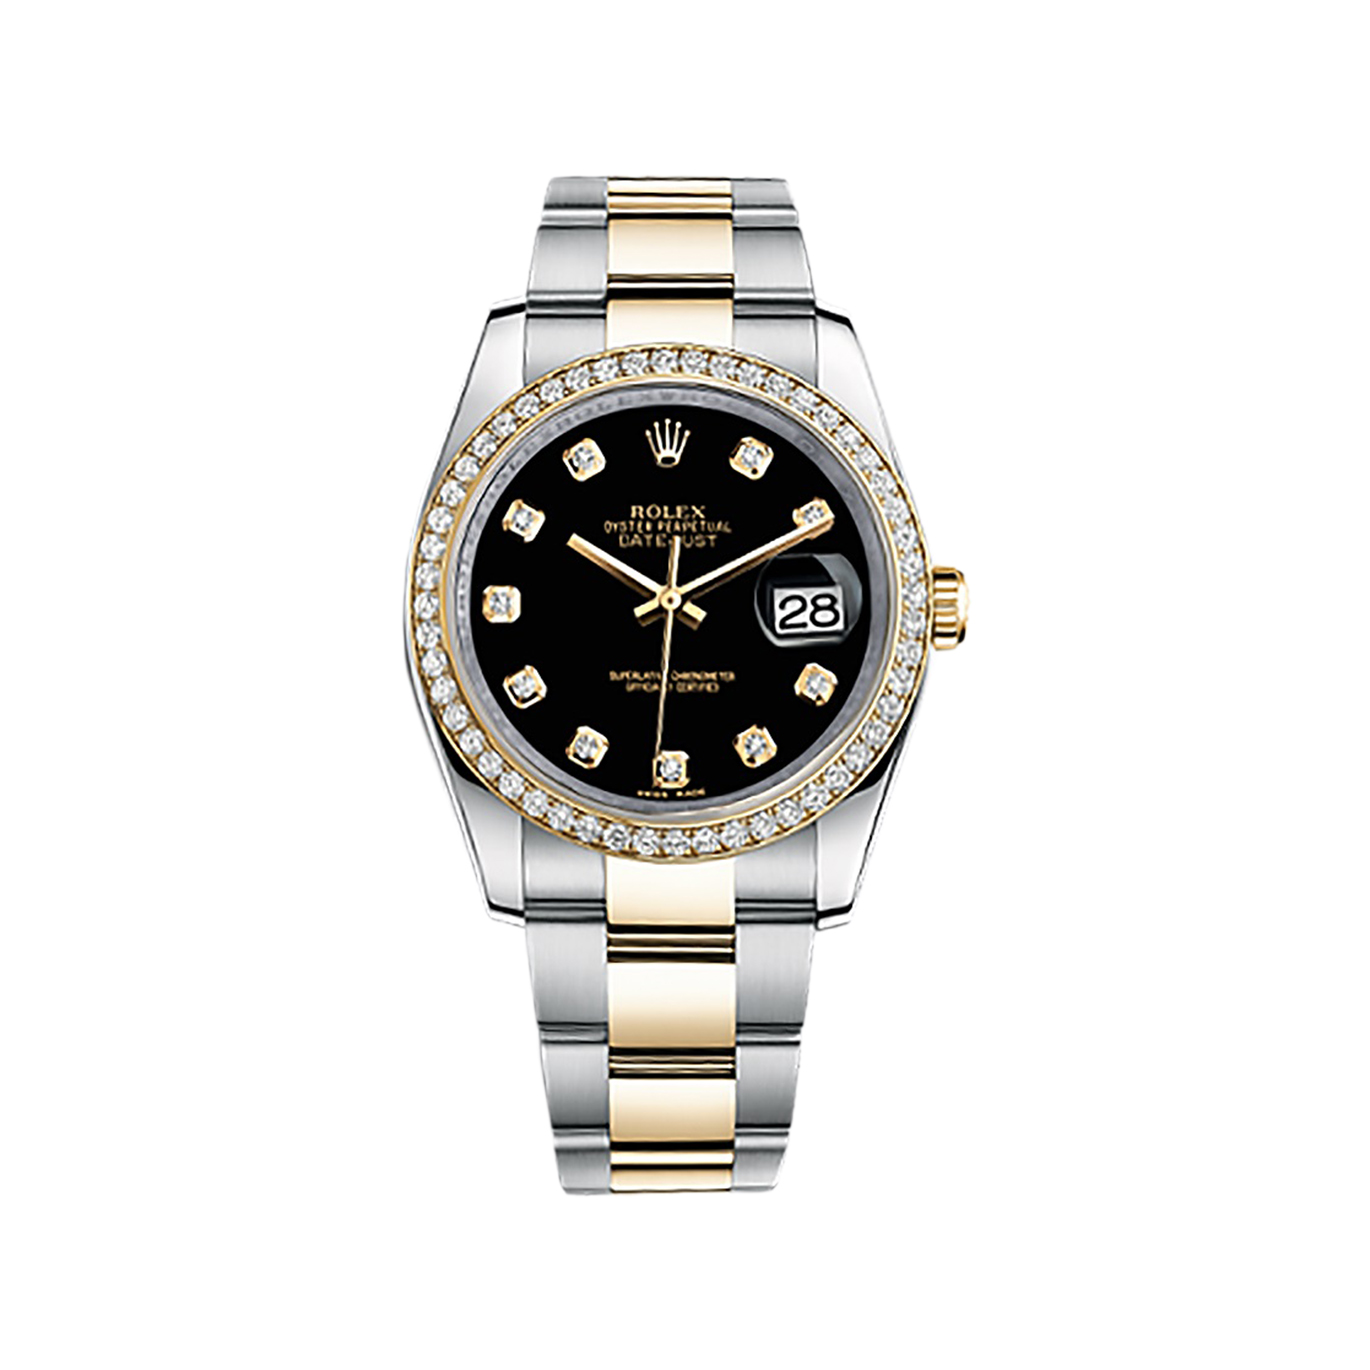 Datejust 36 116243 Gold & Stainless Steel Watch (Black Set with Diamonds) - Click Image to Close